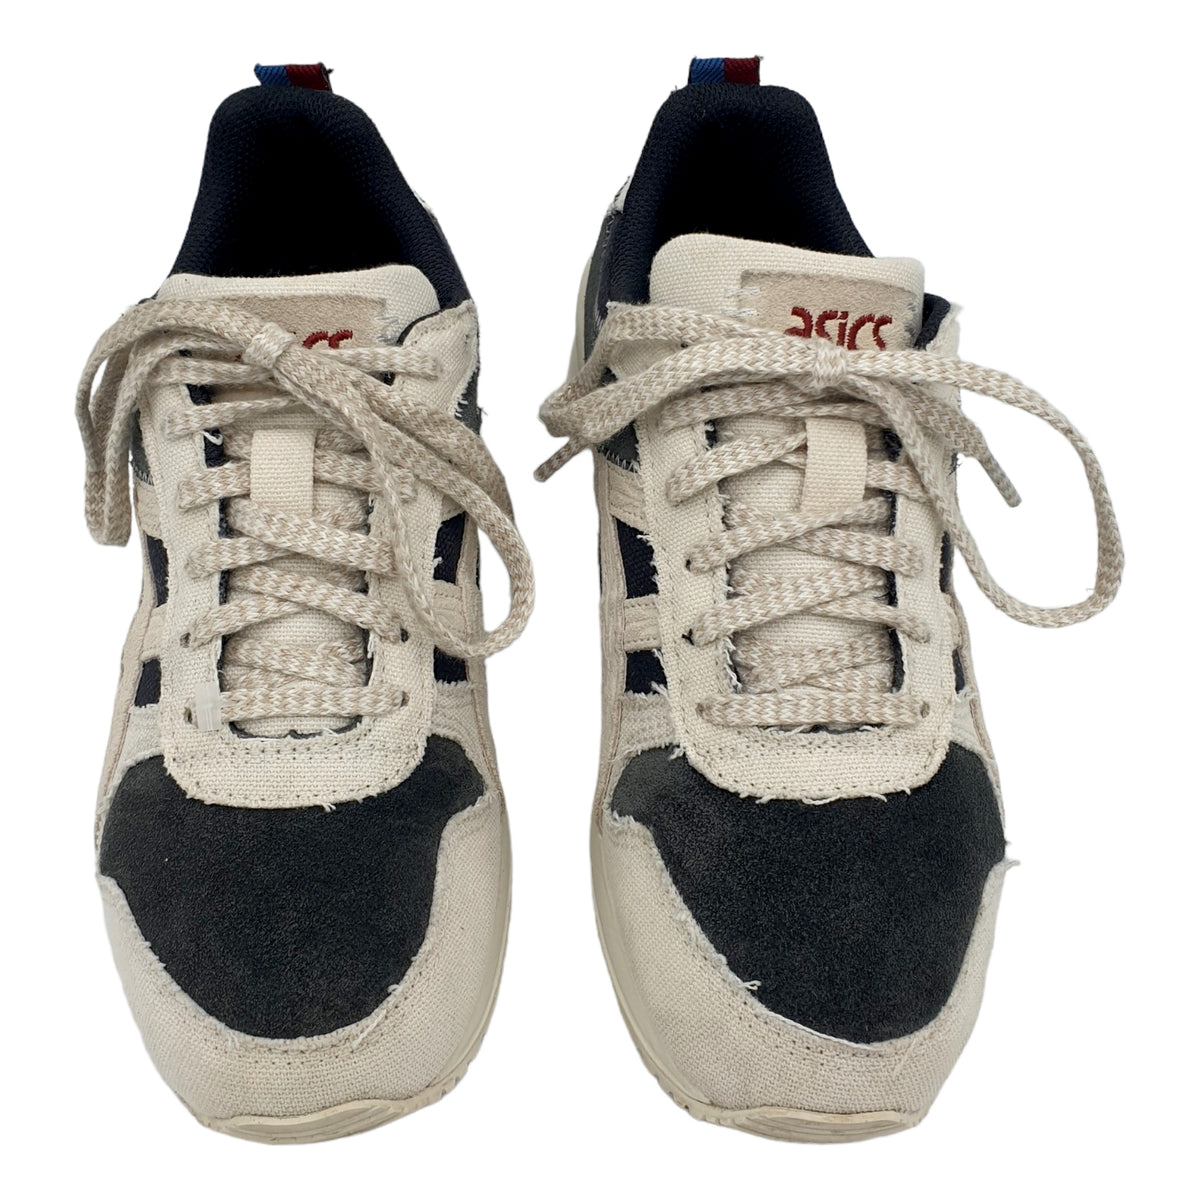 Asics Grey/White Suede Trainers